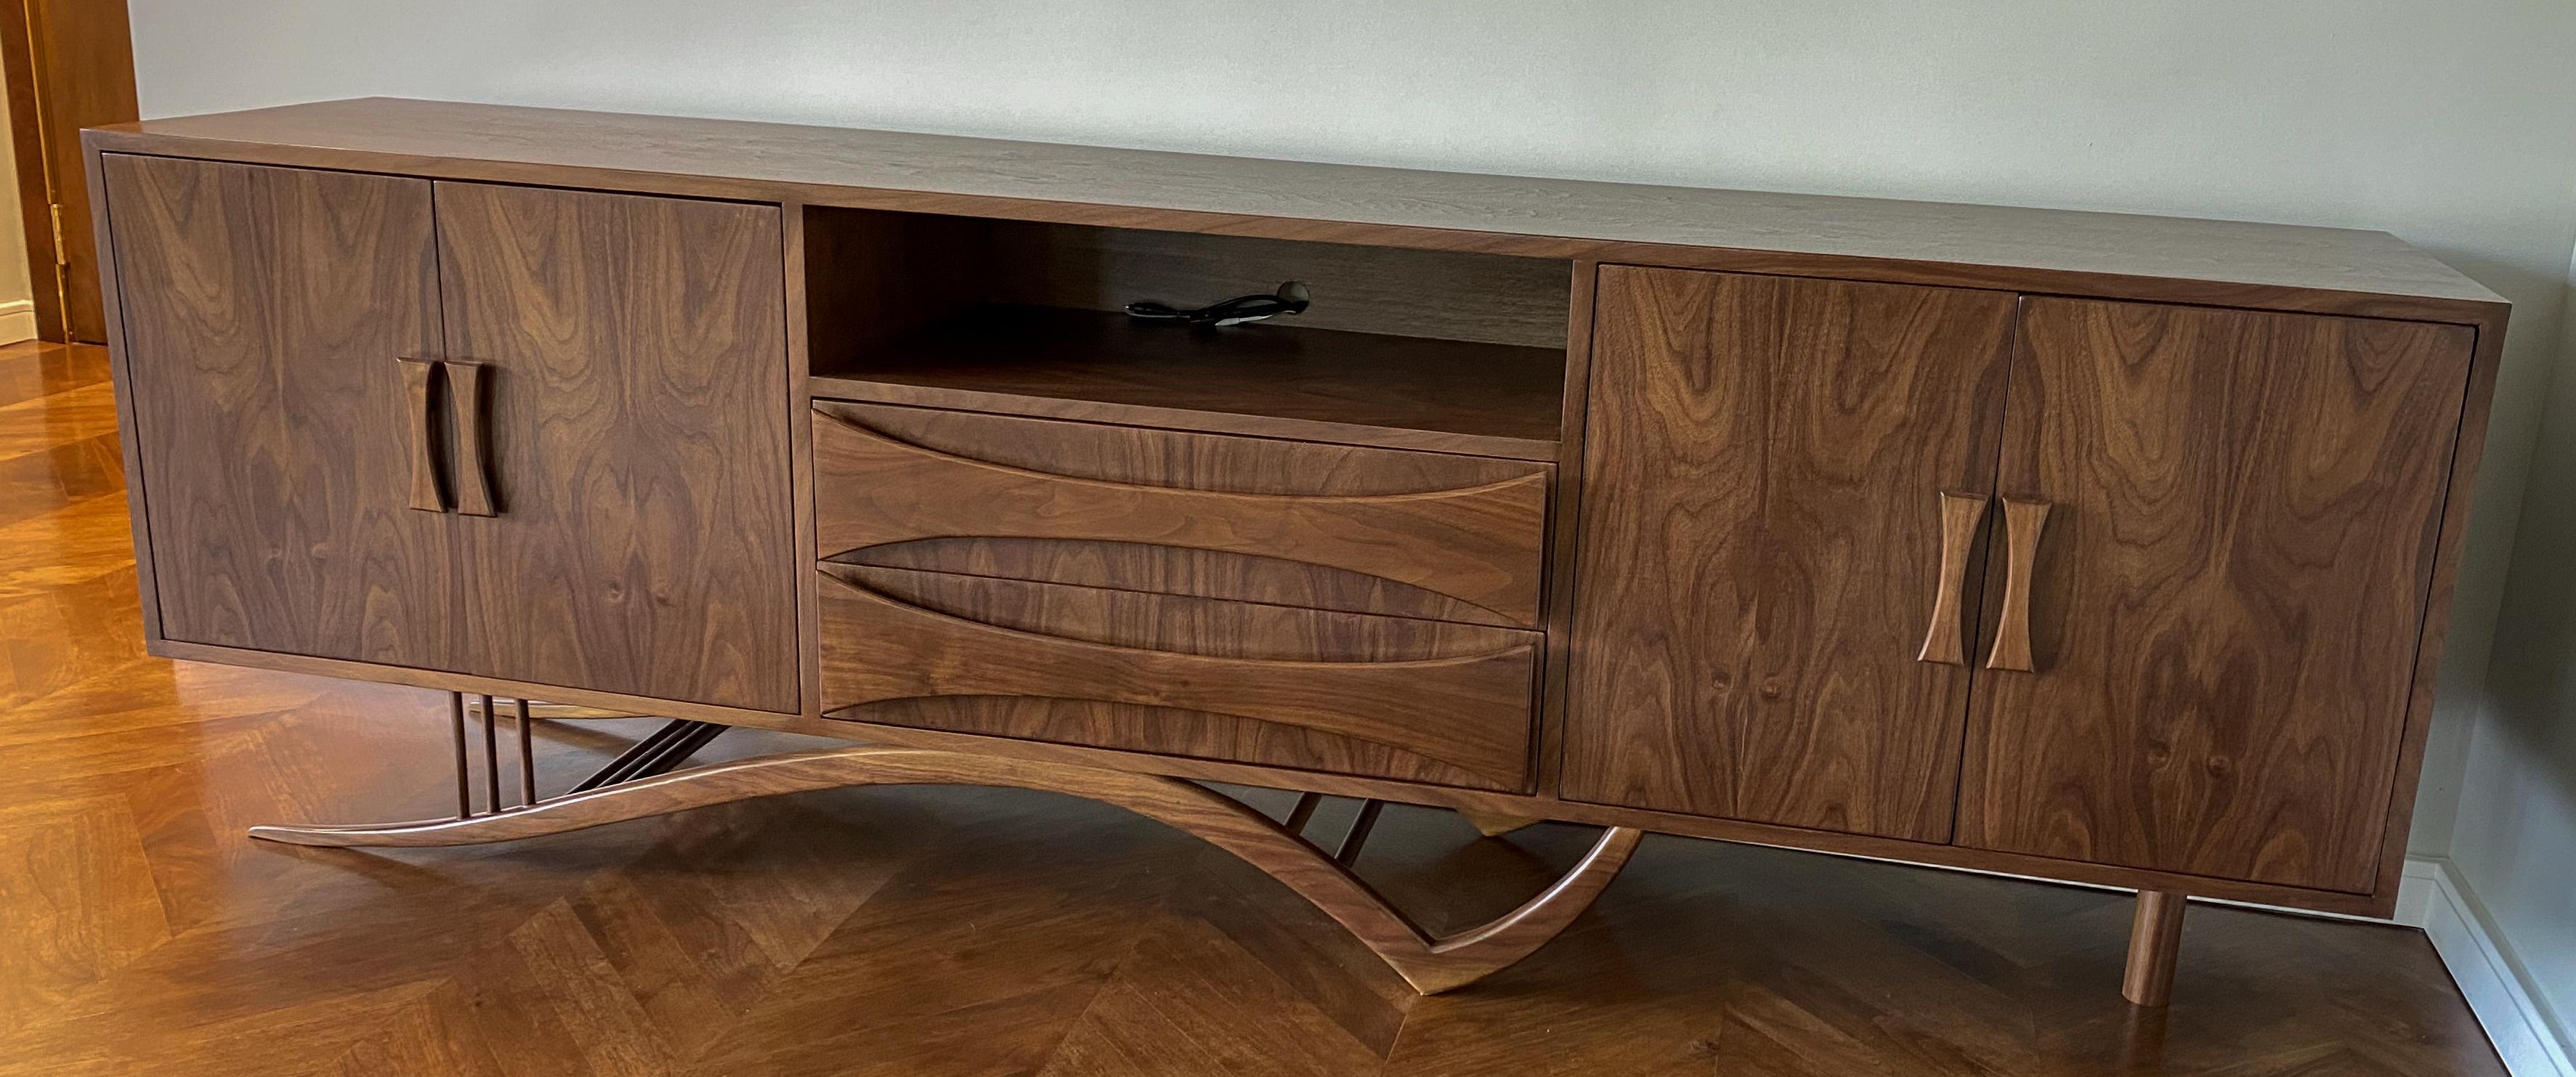 Custom midcentury style American walnut sideboard with elegant curved leg, two cabinets on either end and drawers in the middle and port to use as an entertainment center. Made in Los Angeles by Adesso Imports. Can be done in different sizes, woods